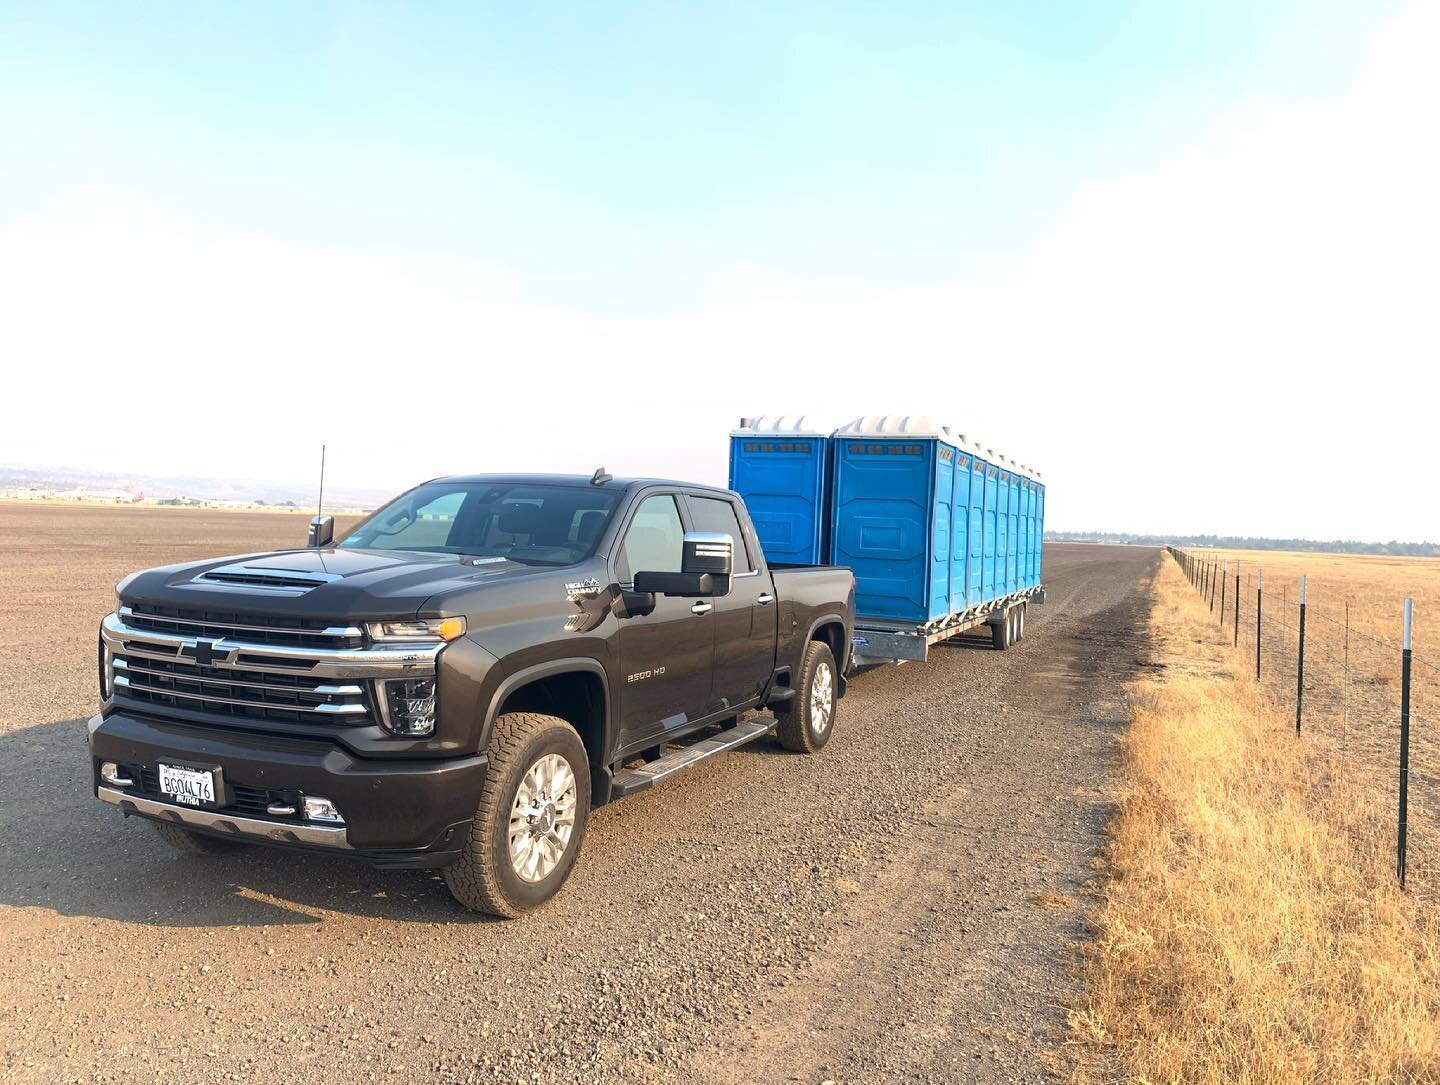 We are trailered up and ready for events! Let&rsquo;s get out enjoy the sun! #eventrentals #toilets #weddings #fun #summer #redding #shastacounty #rodeo